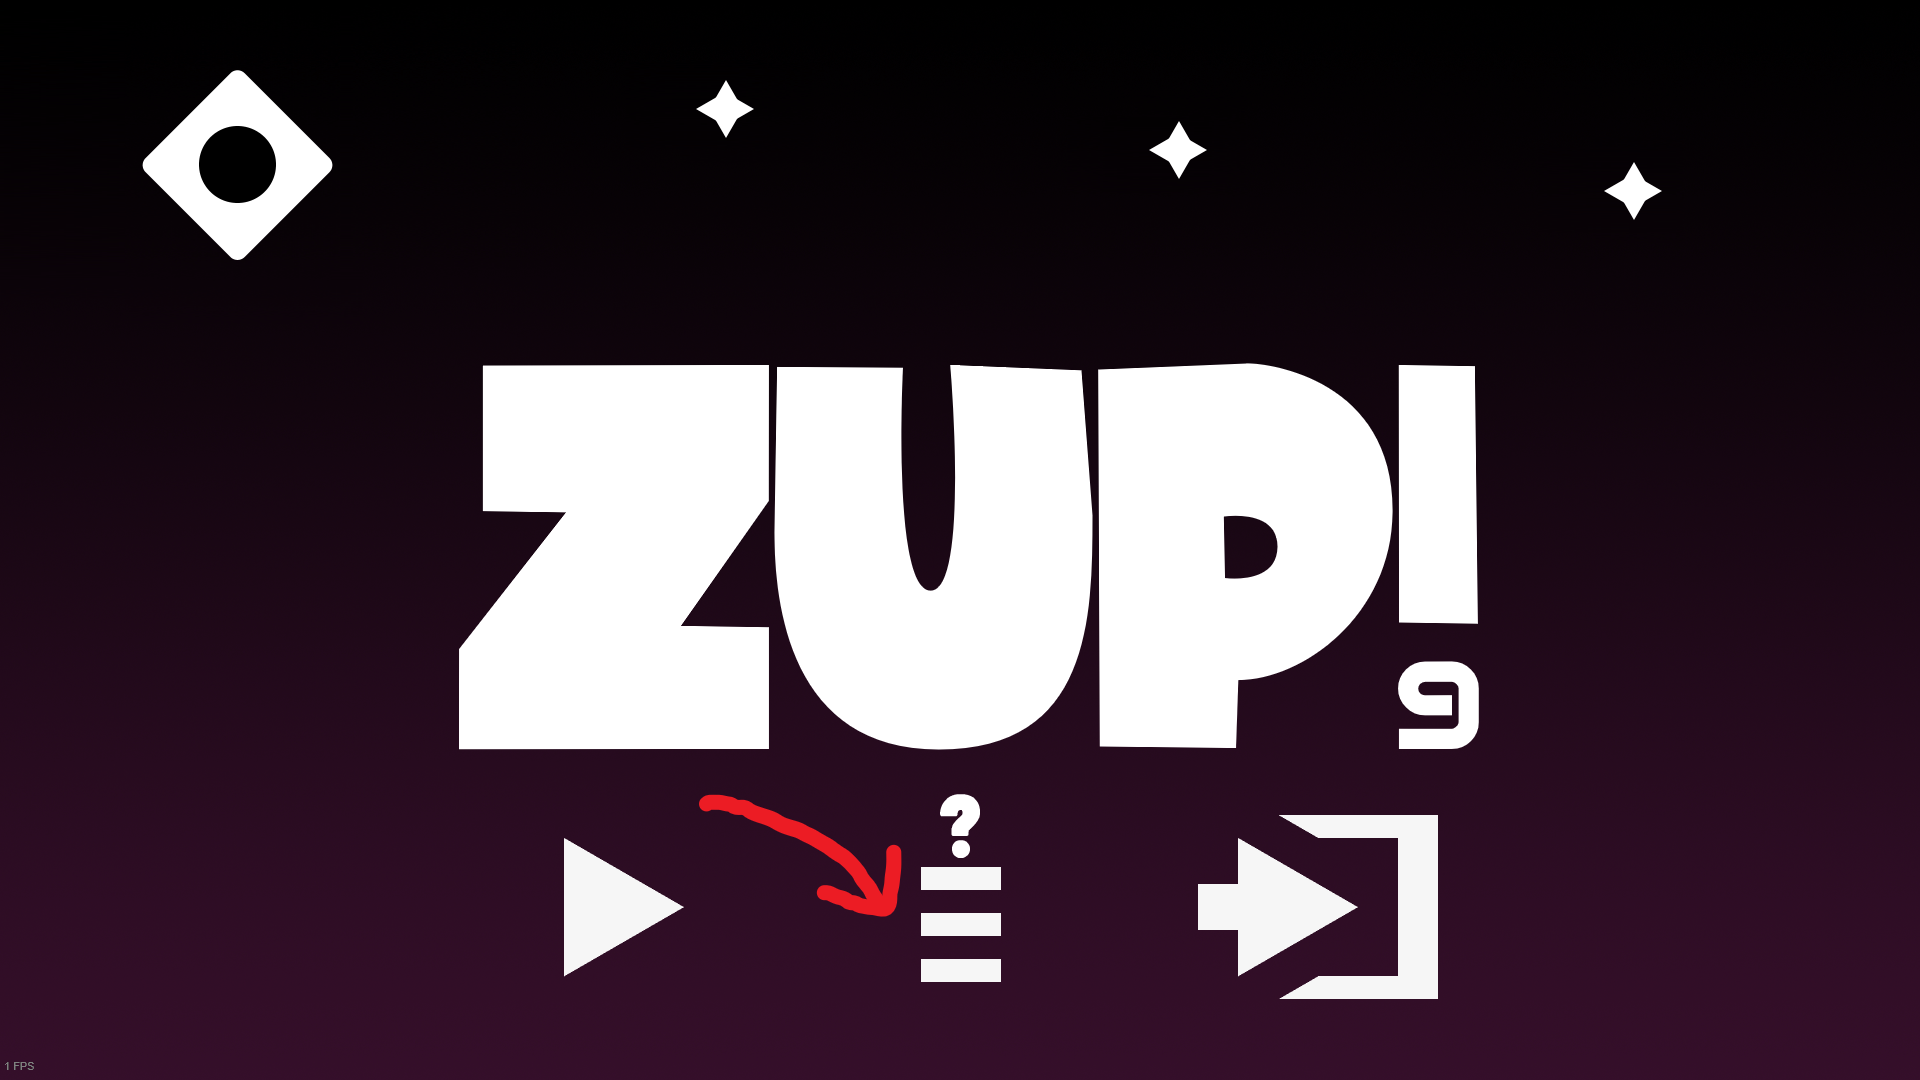 Zup! 9 Getting all Achievements